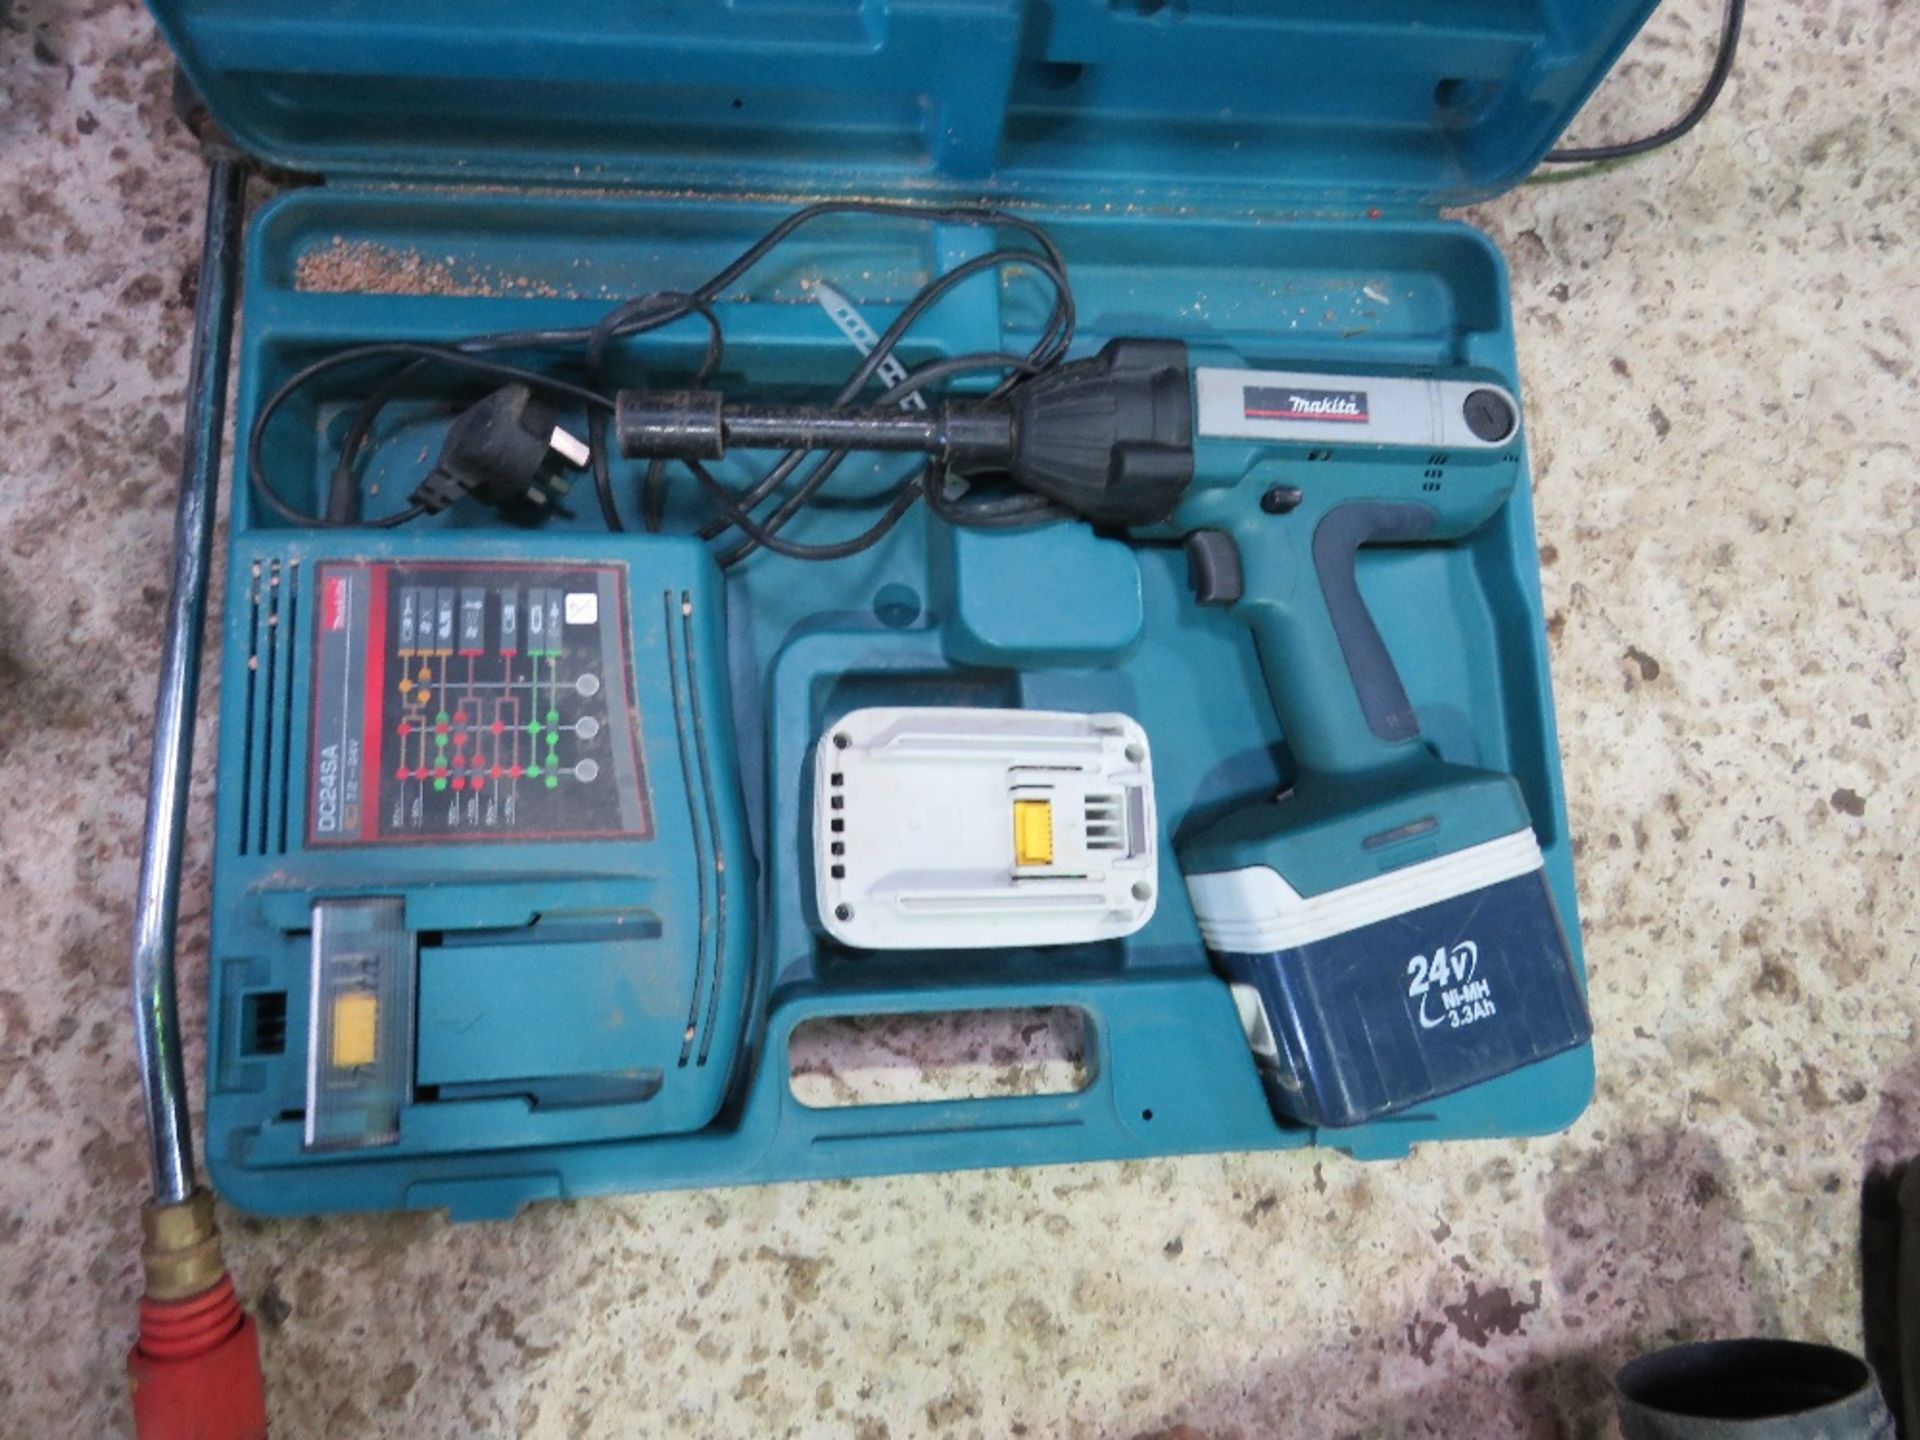 MAKITA 24VOLT BATTERY NUT DRIVER IN A CASE.